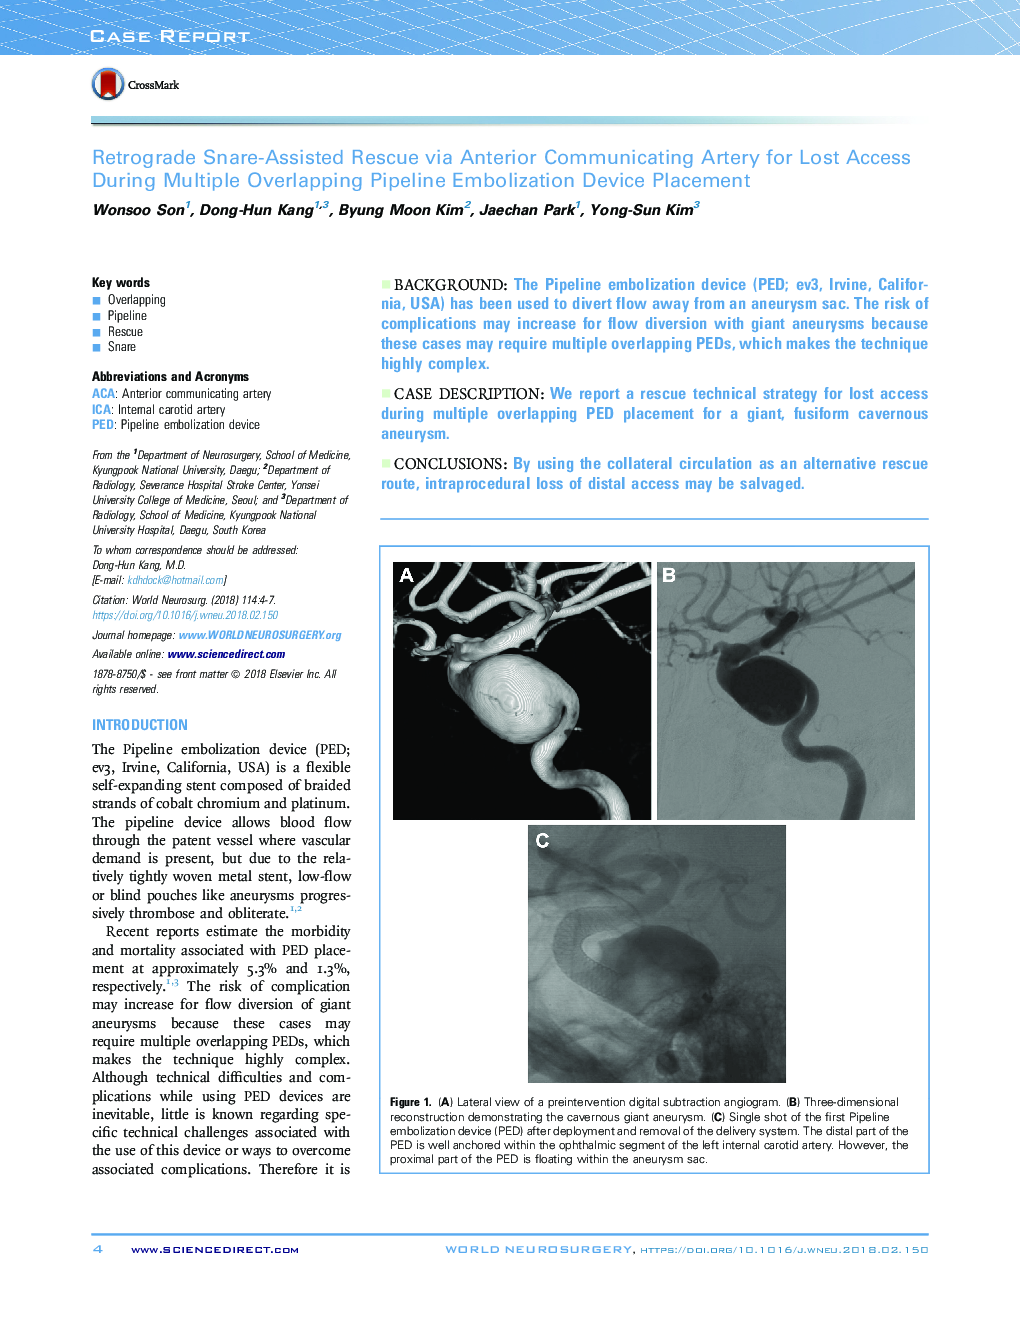 Retrograde Snare-Assisted Rescue via Anterior Communicating Artery for Lost Access During Multiple Overlapping Pipeline Embolization Device Placement